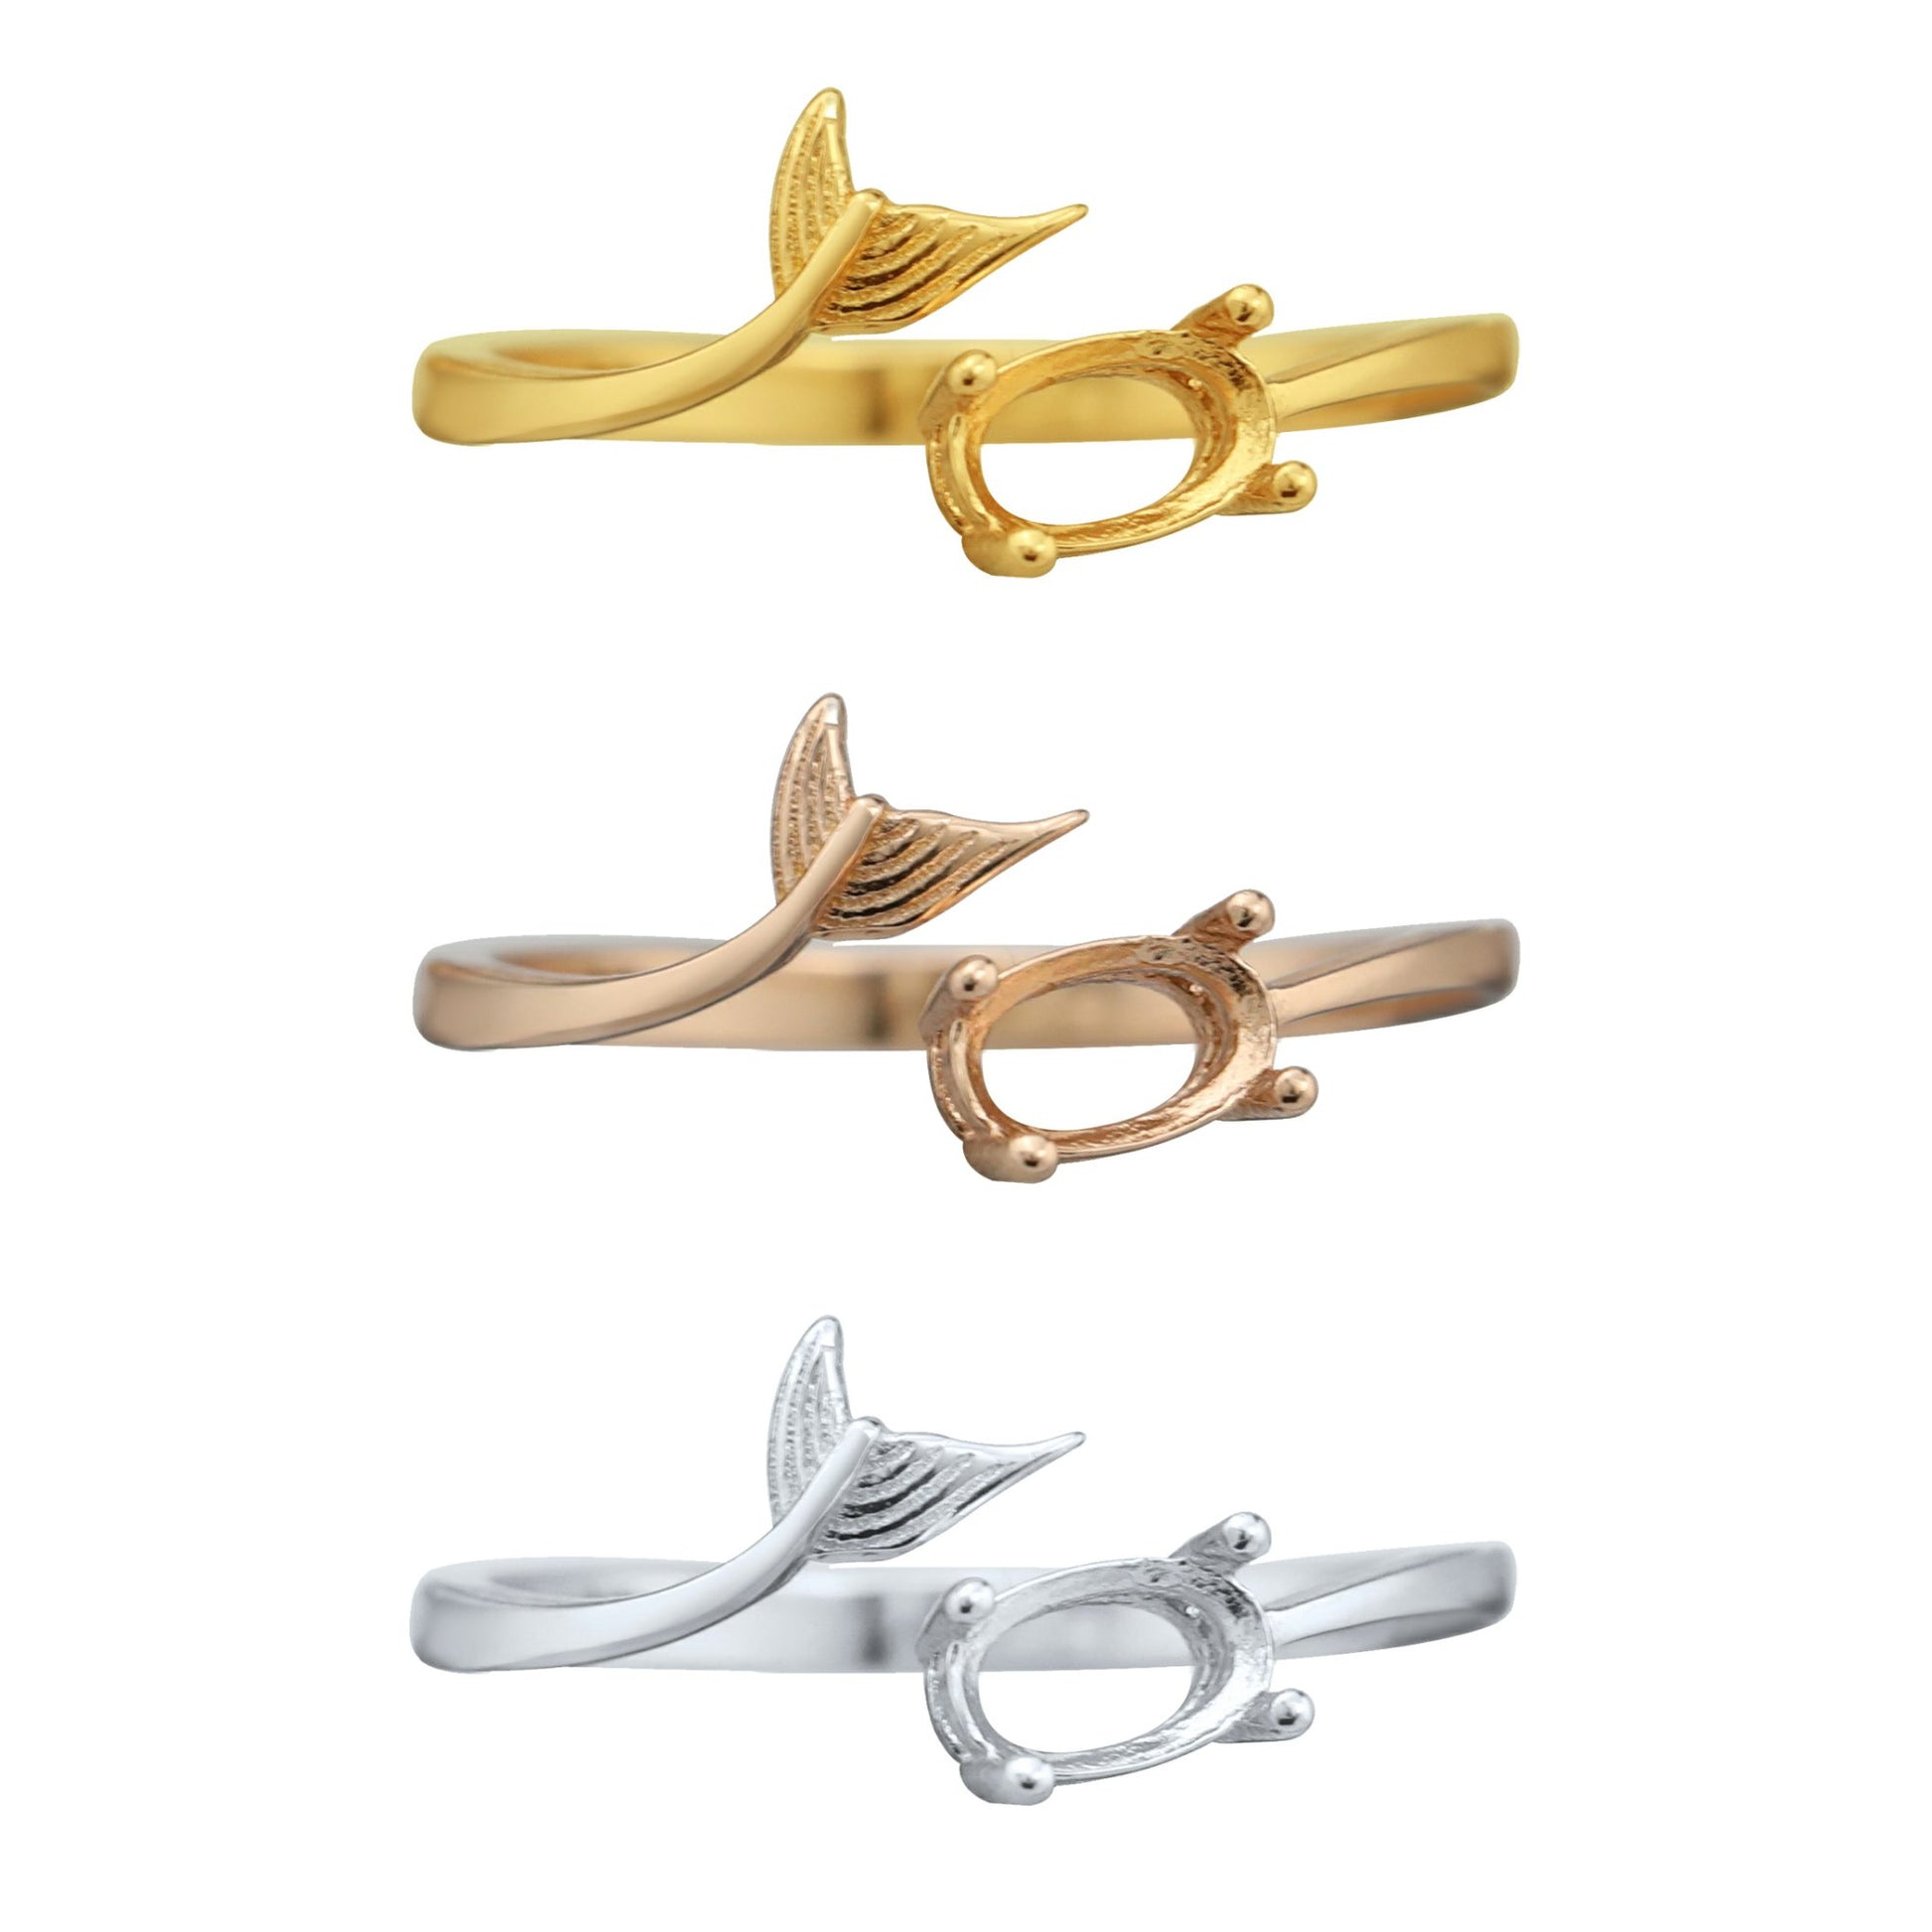 One silver, one gold and one rose gold oval wrap around rings with a mermaid tail on the opposite ends.